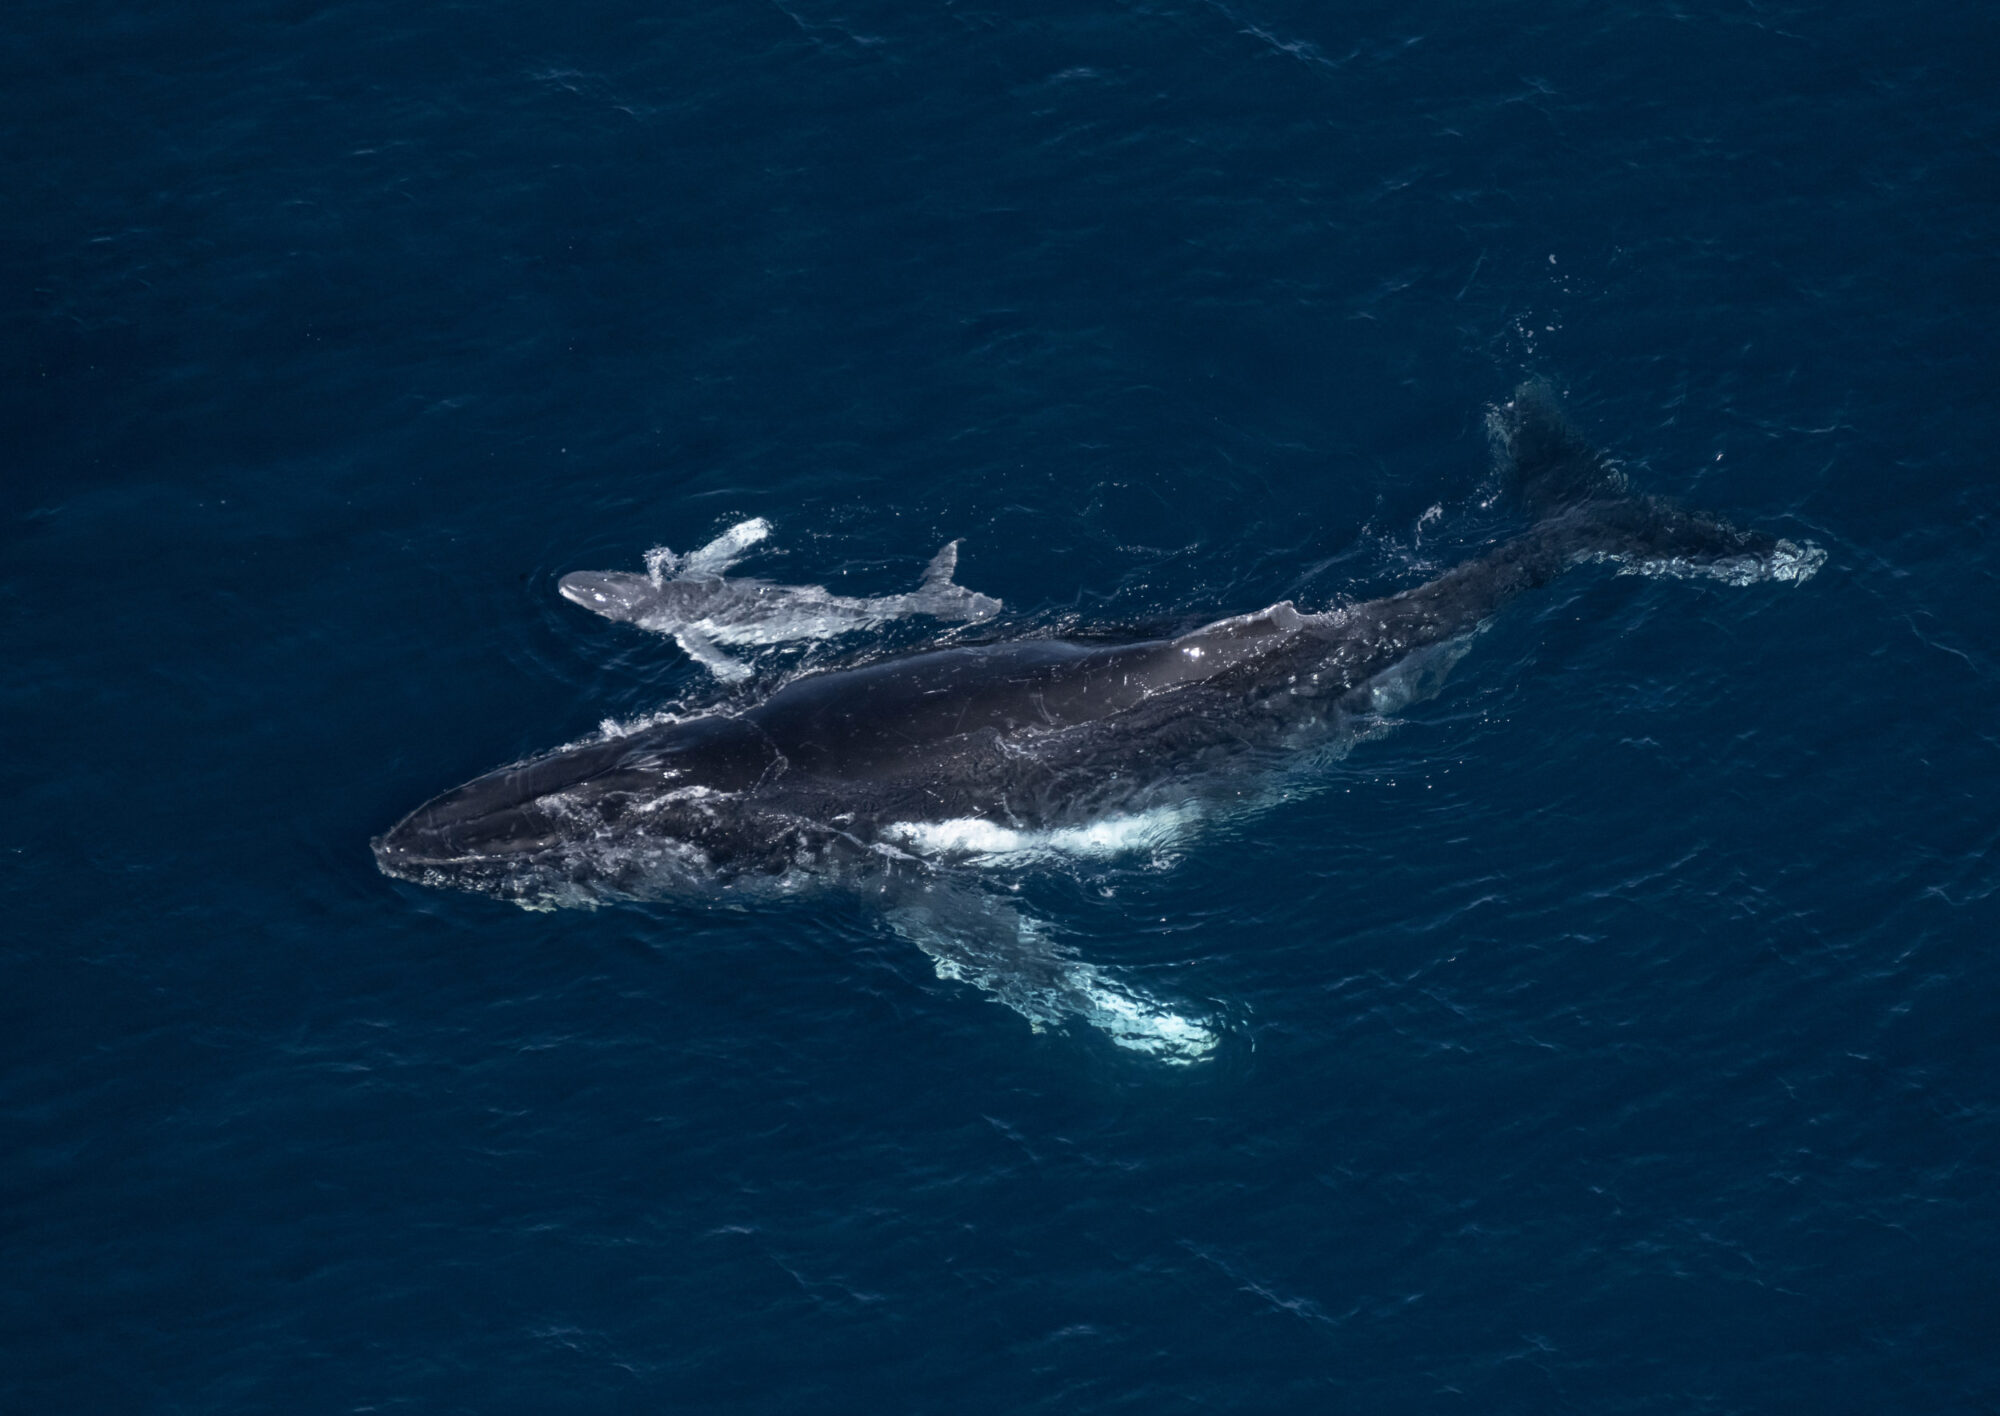 A mother and baby whale in the ocean